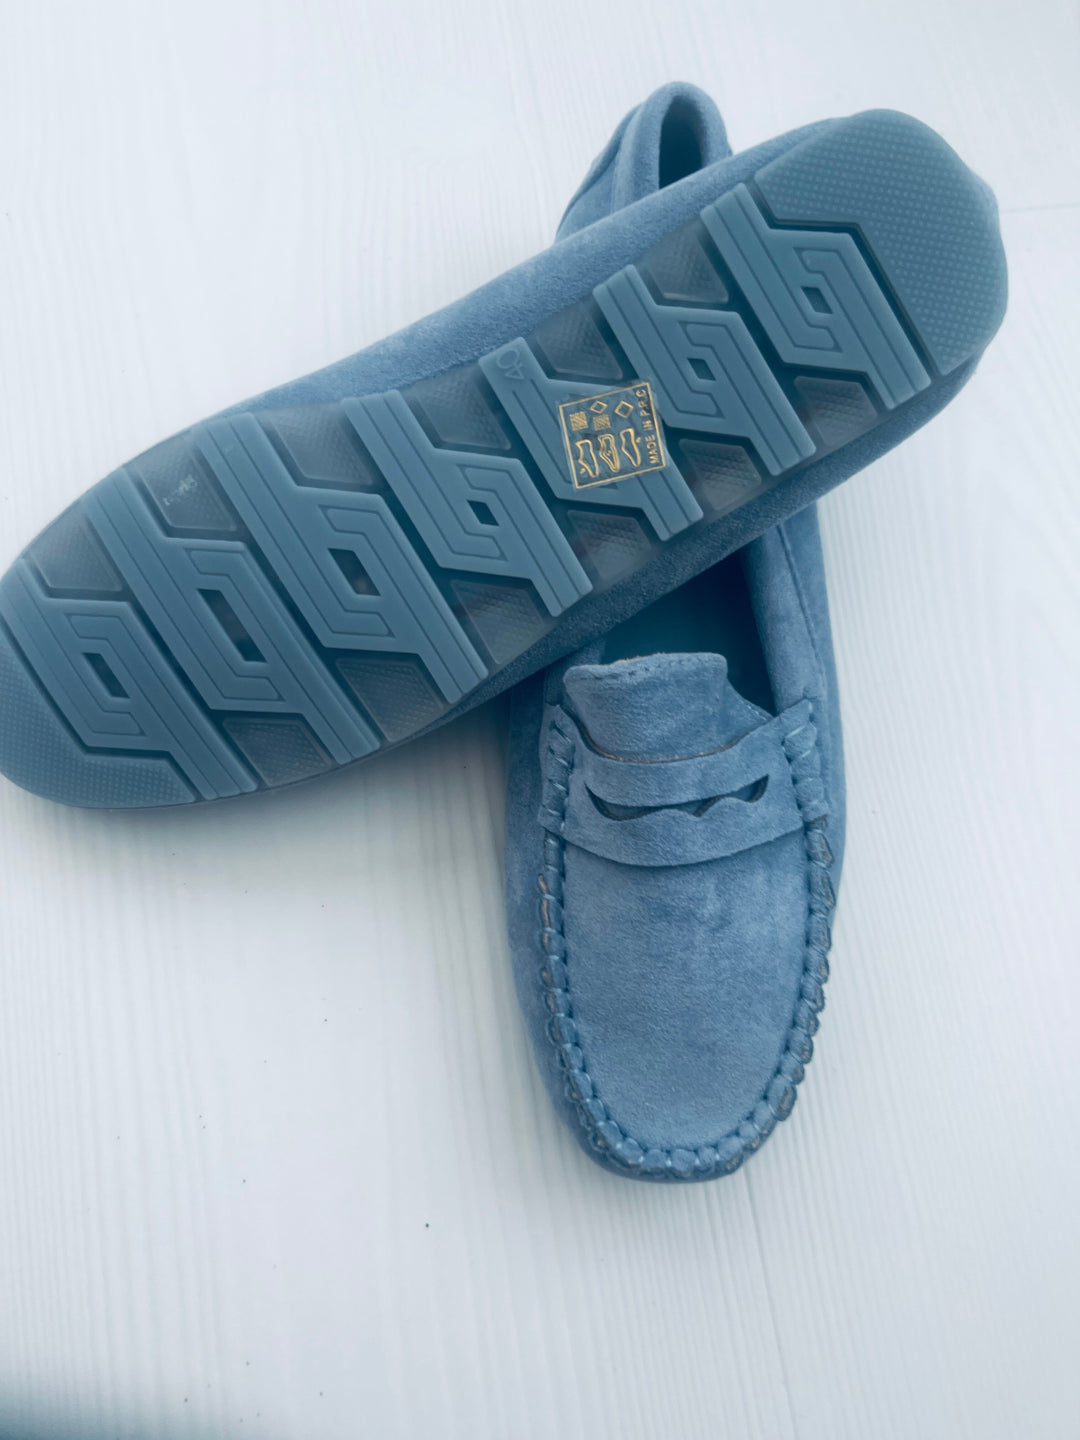 Faux suede Blue loafers